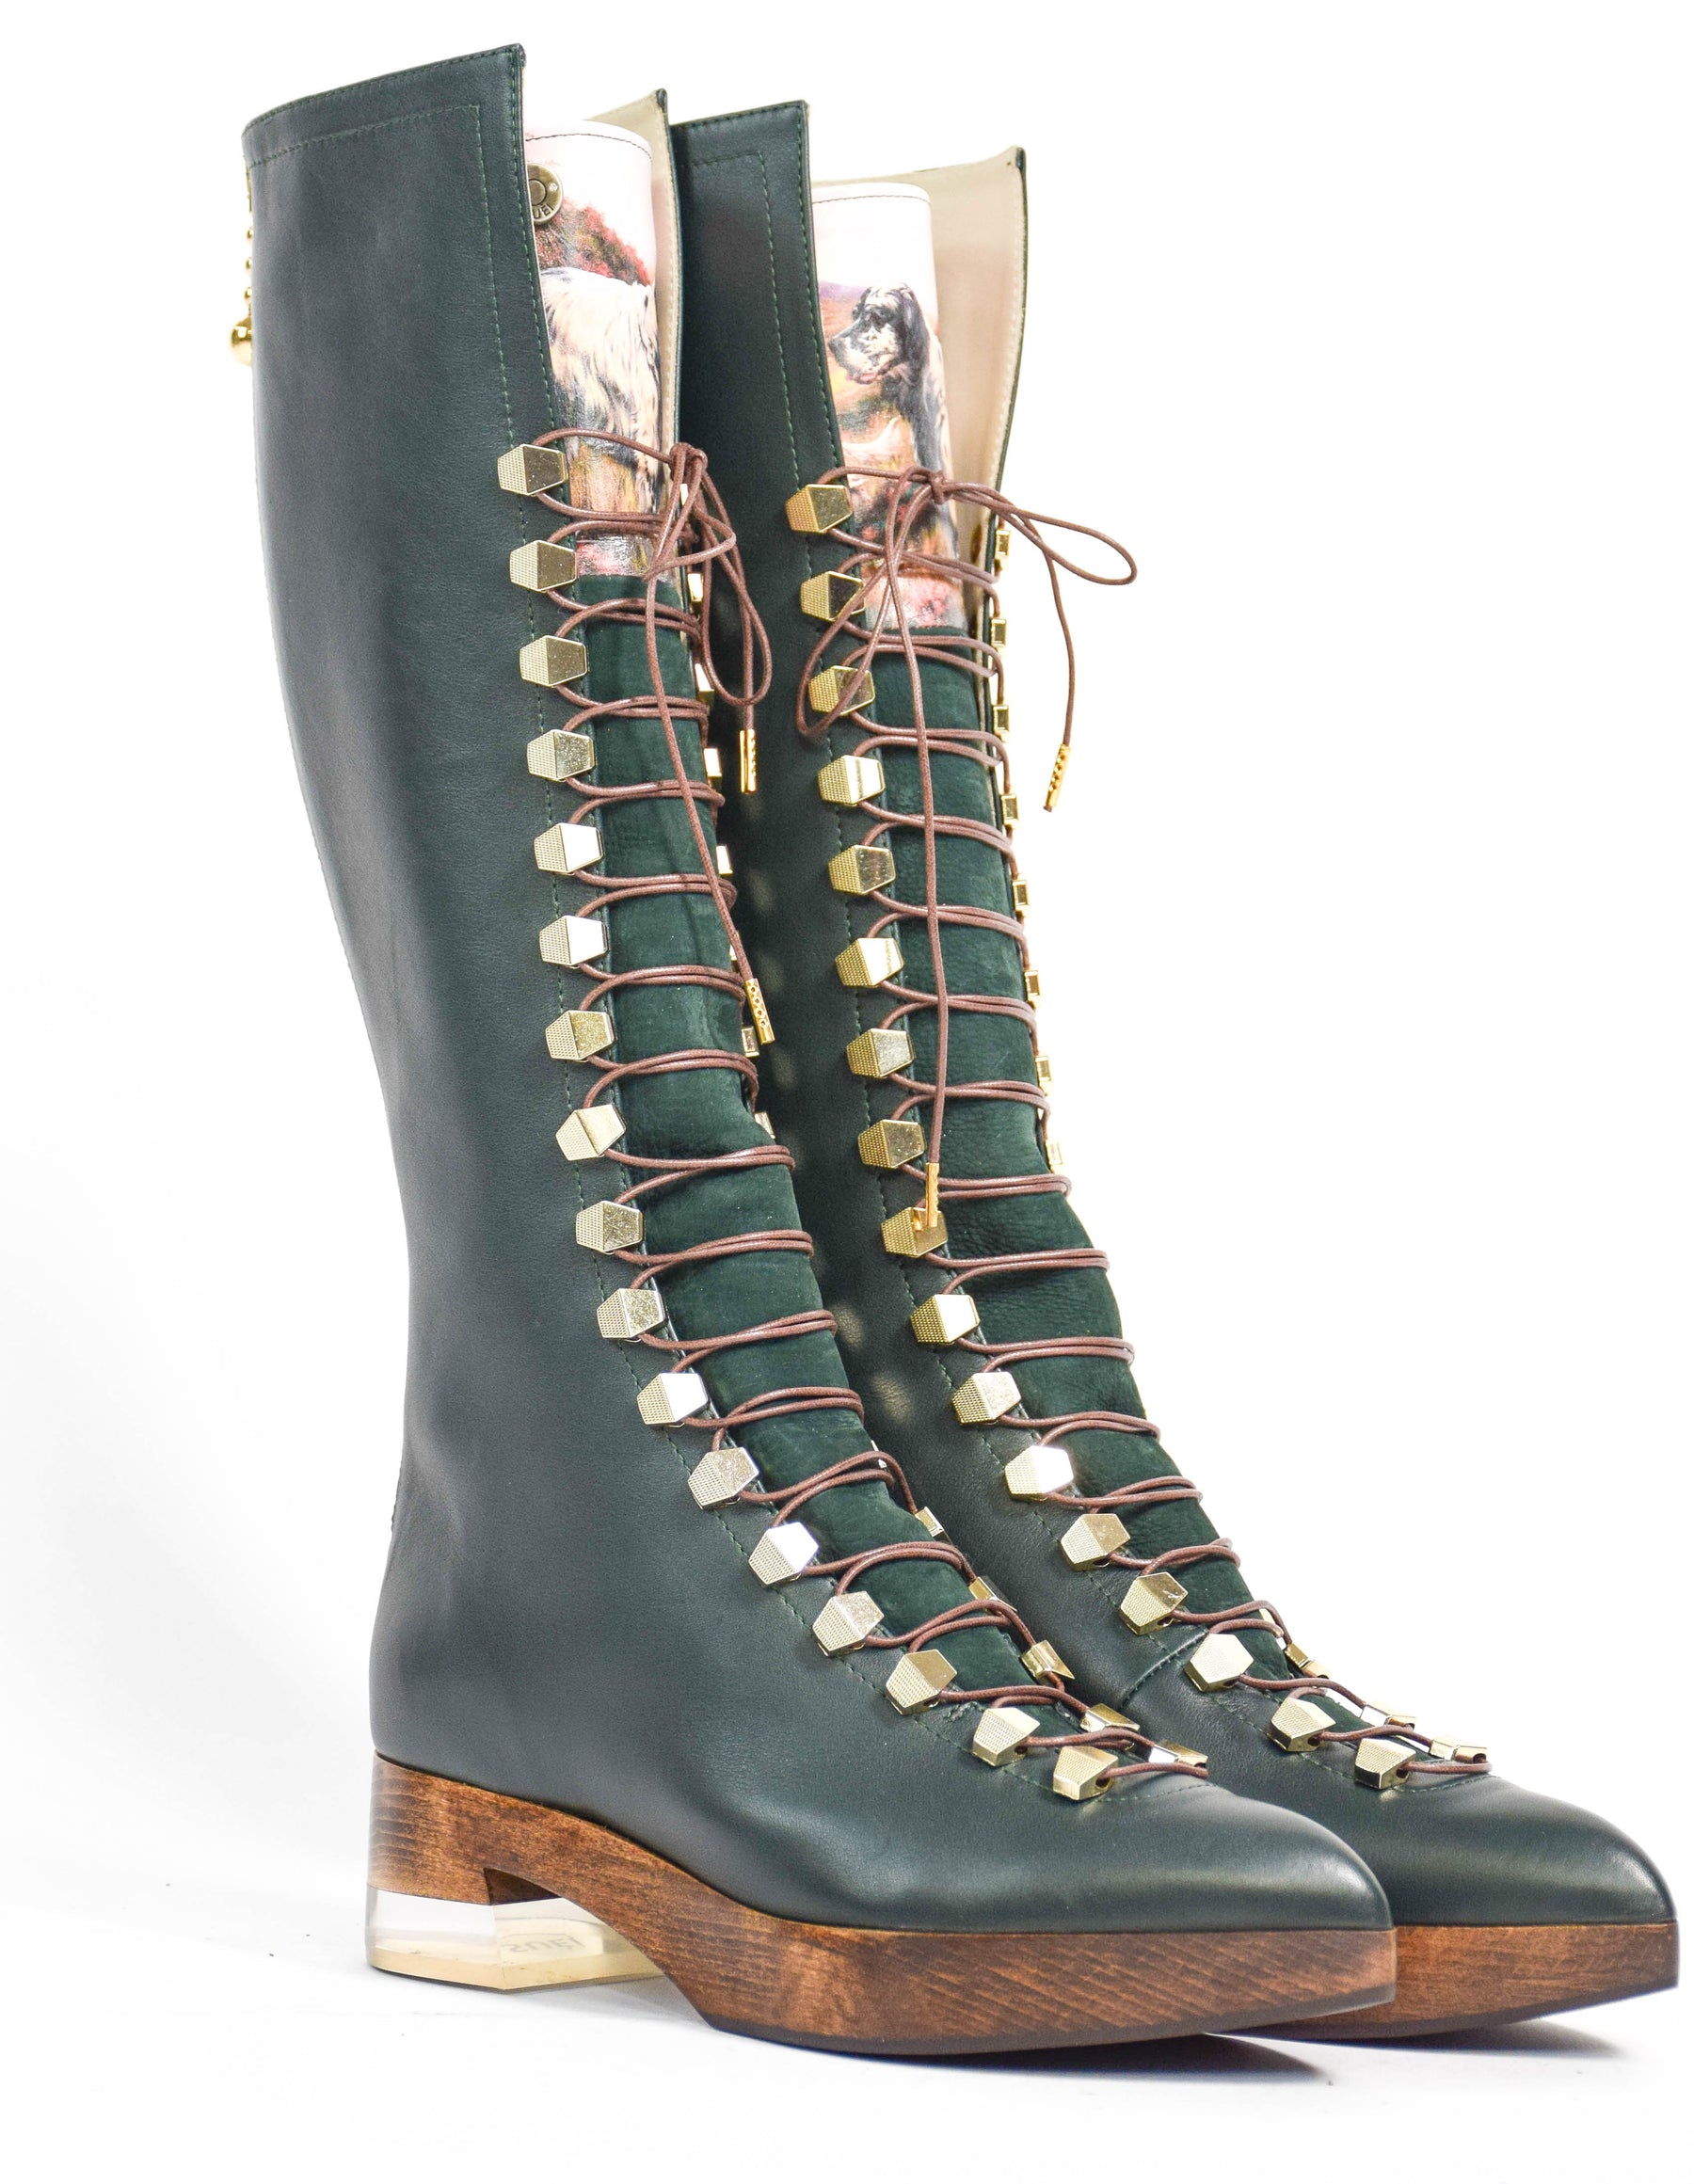 HIGH LACE-UPS BOOTS WITH SETTERS ART PRINTING